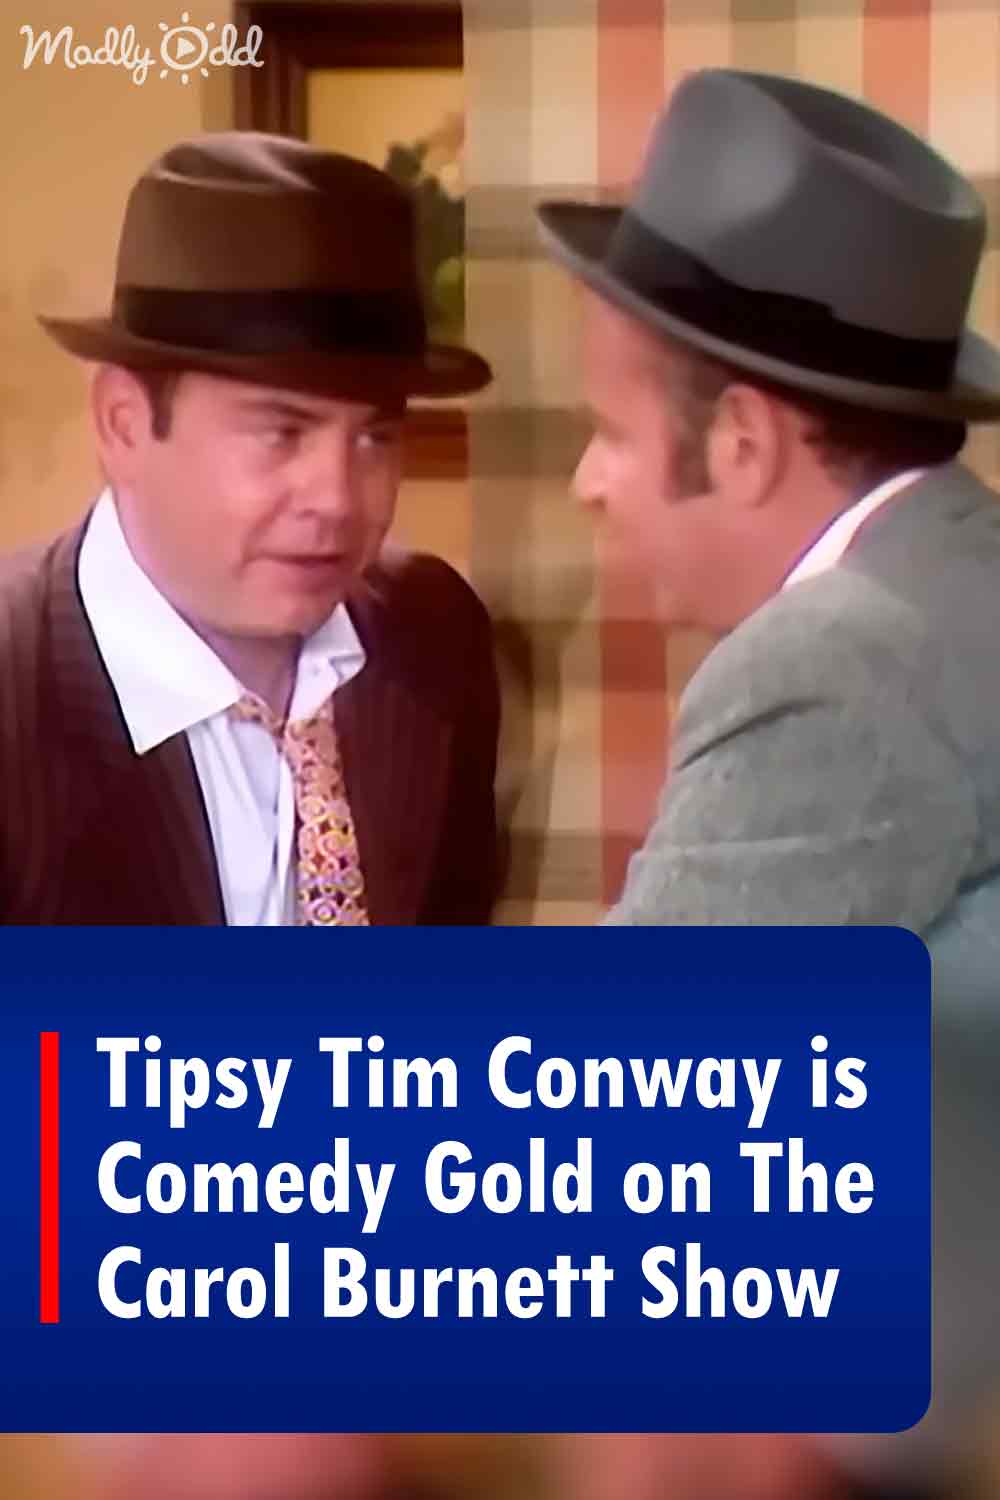 Tipsy Tim Conway is Comedy Gold on The Carol Burnett Show